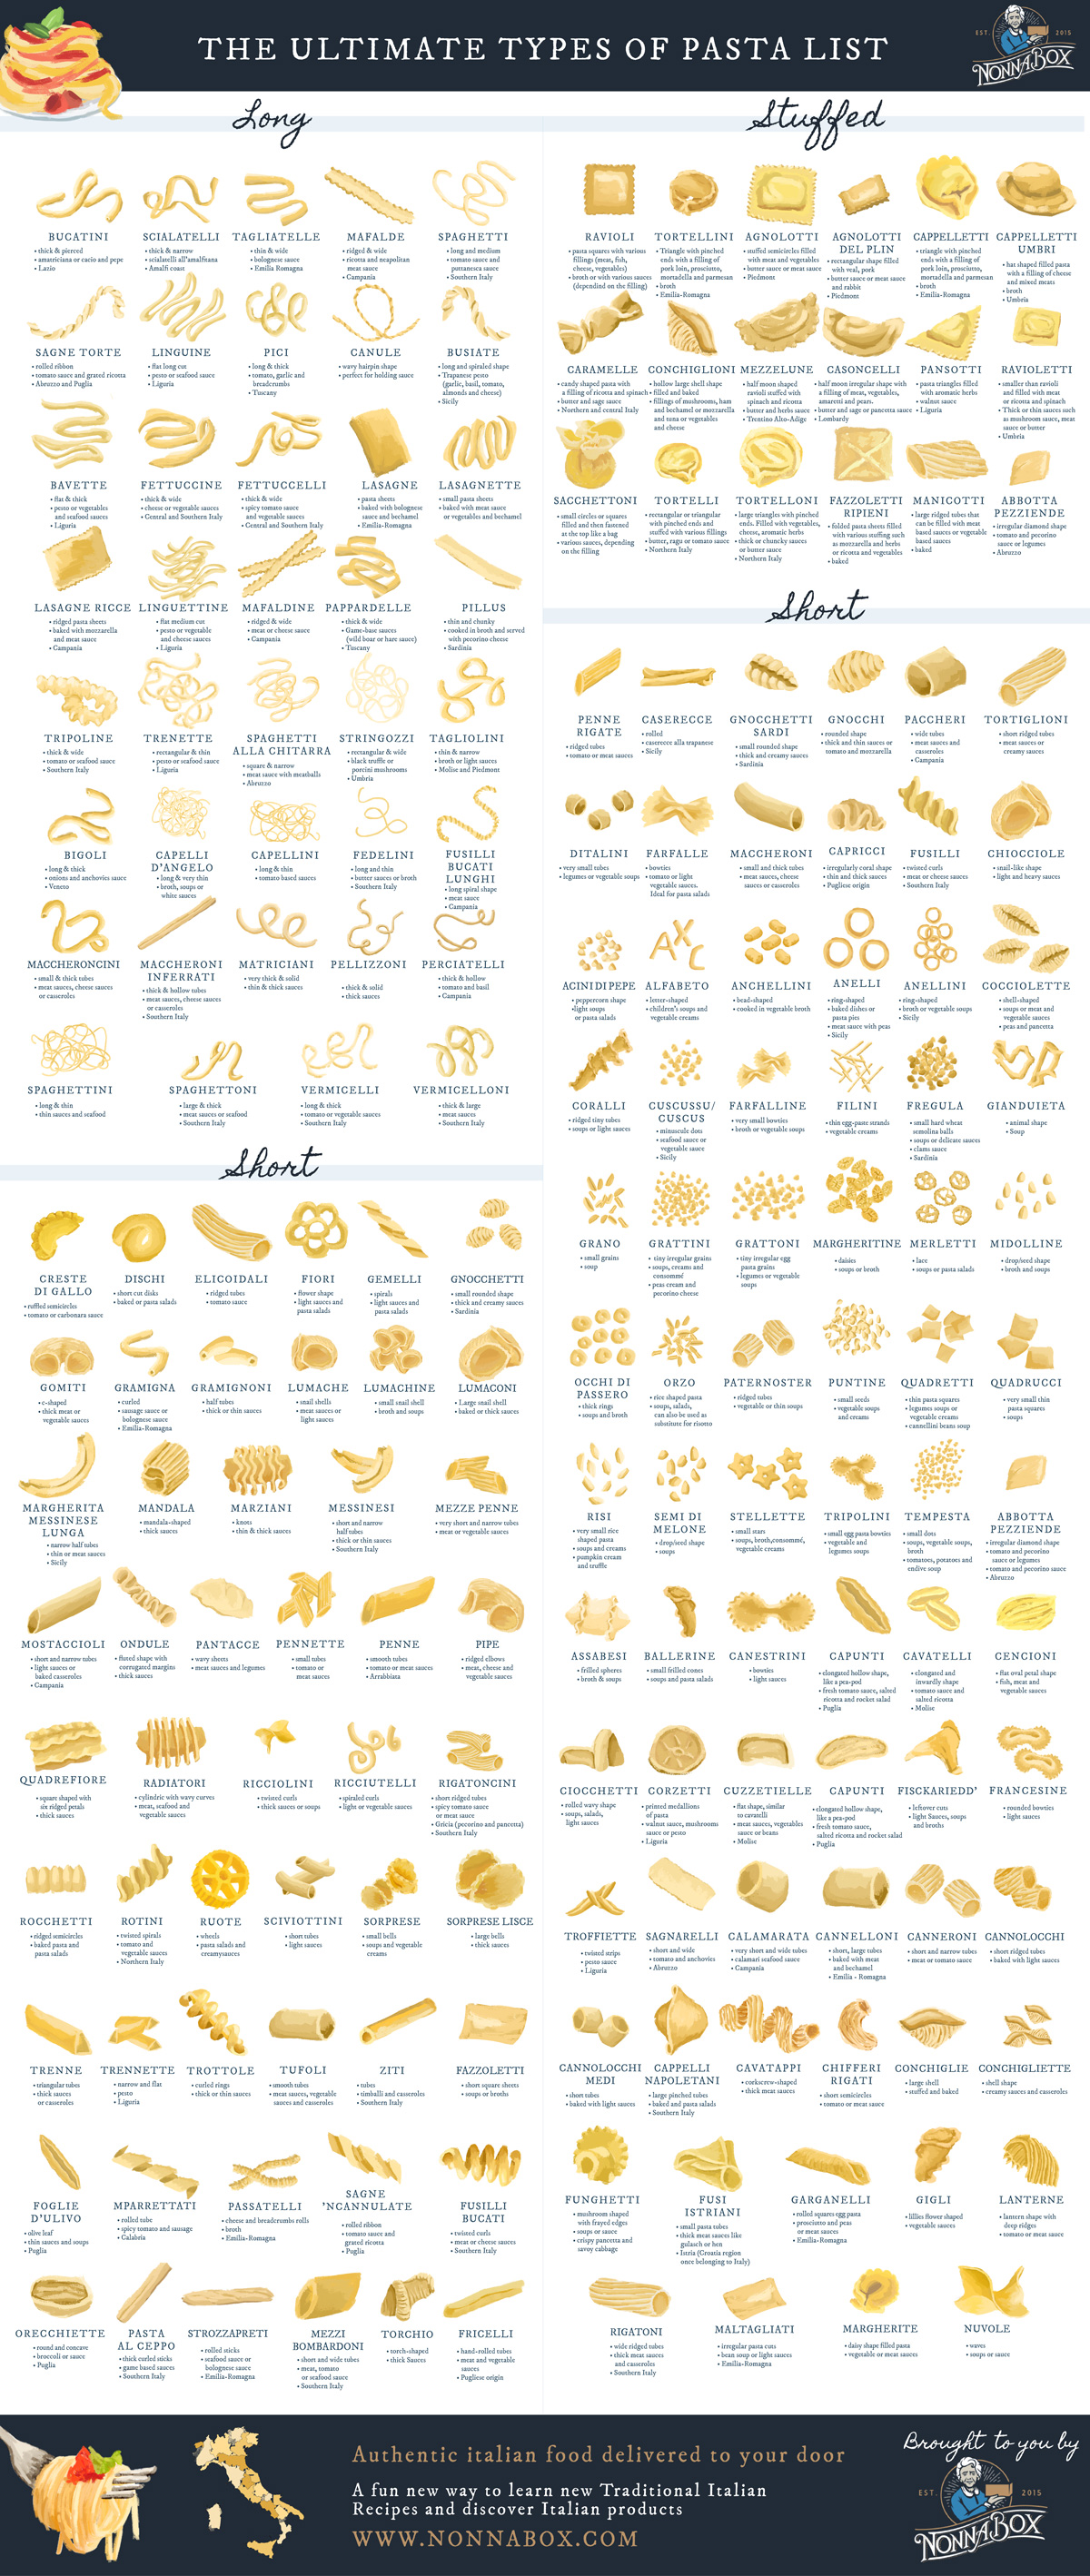 The Ultimate Guide to Pasta Shapes :: NoGarlicNoOnions: Restaurant, Food,  and Travel Stories/Reviews - Lebanon